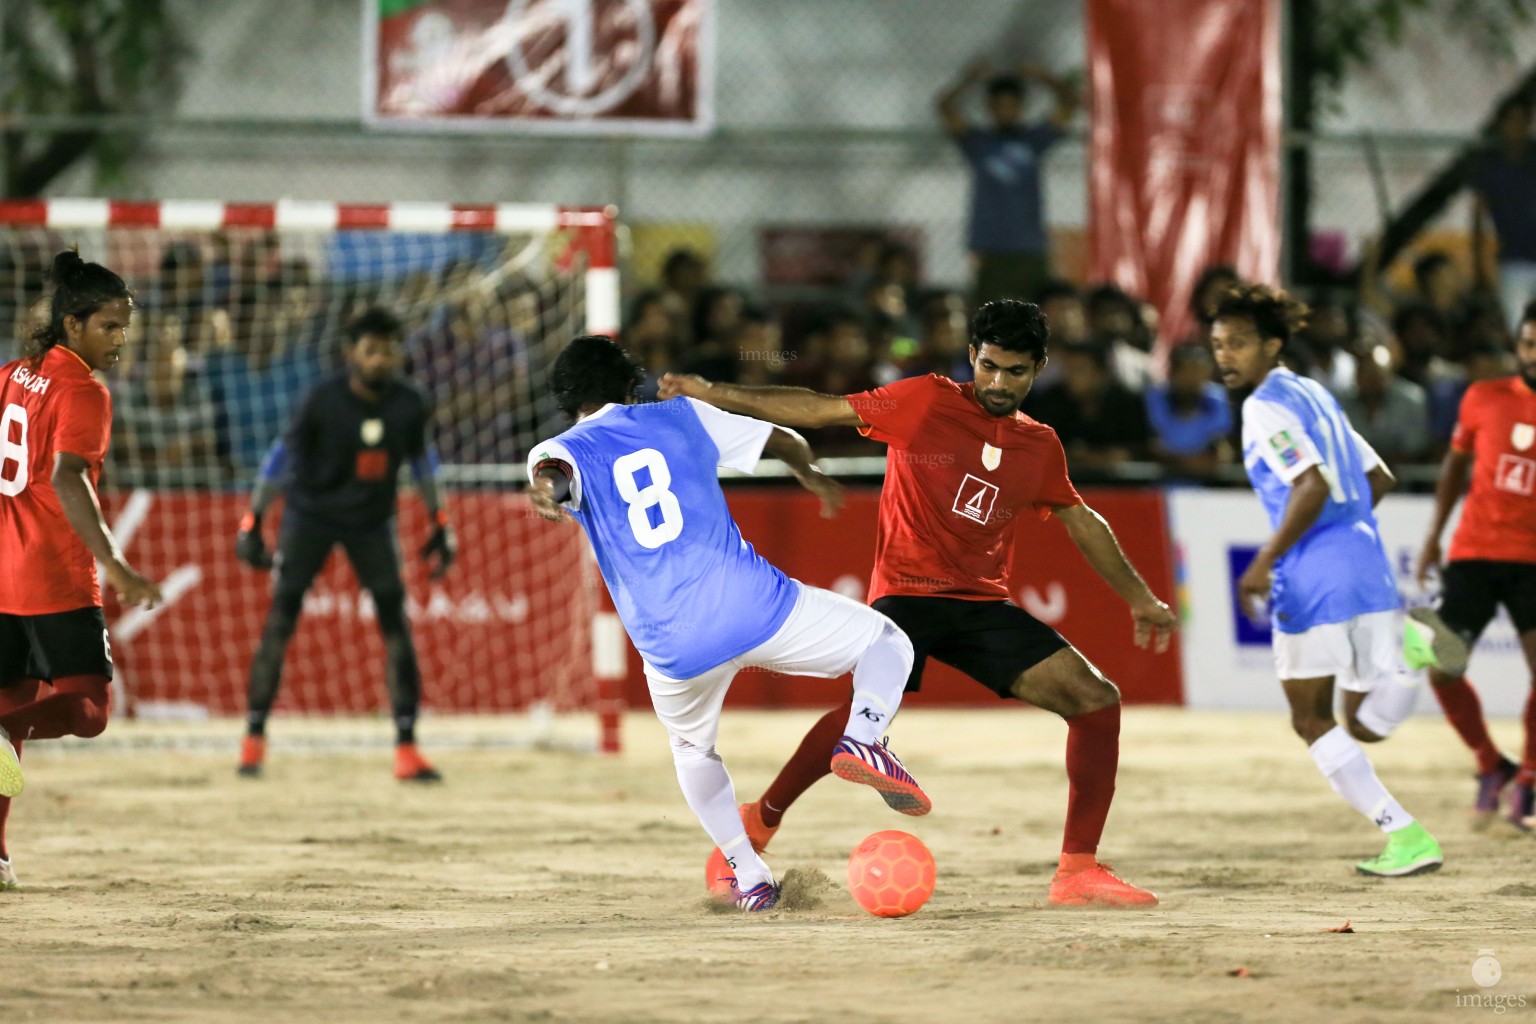 Opening matches of Club Maldives Cup 2017 and 18/30 Womens Futsal Fiesta in Male', Maldives, Saturday, April 8, 2017.(Images.mv Photo/ Hussain Sinan). 